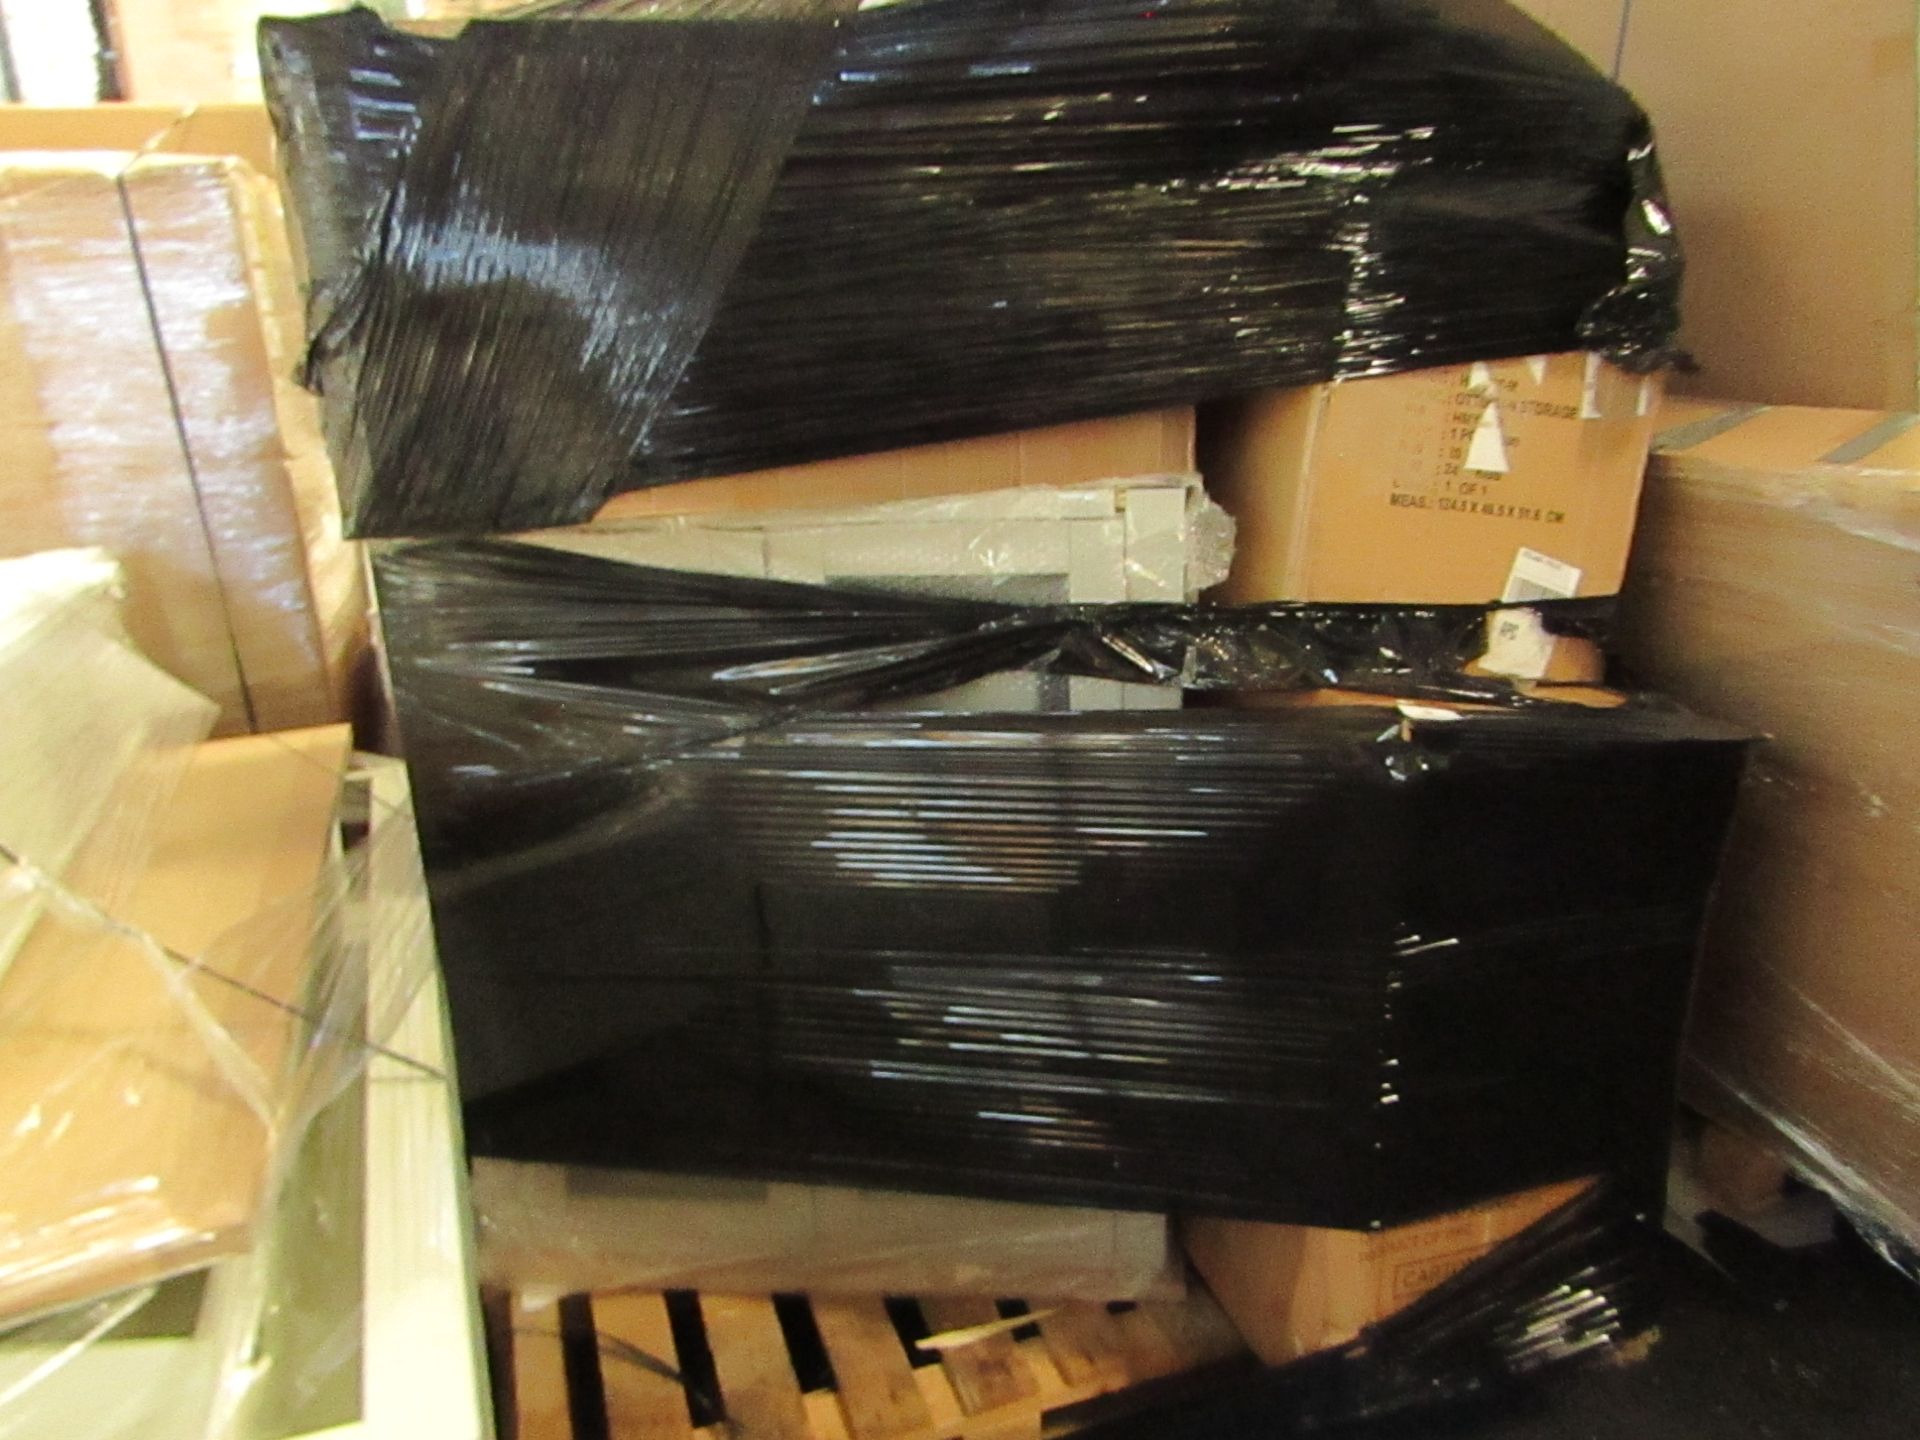 1 X Pallet of Dwell customer returns. This pallet is unmanifested and unchecked. Standard terms